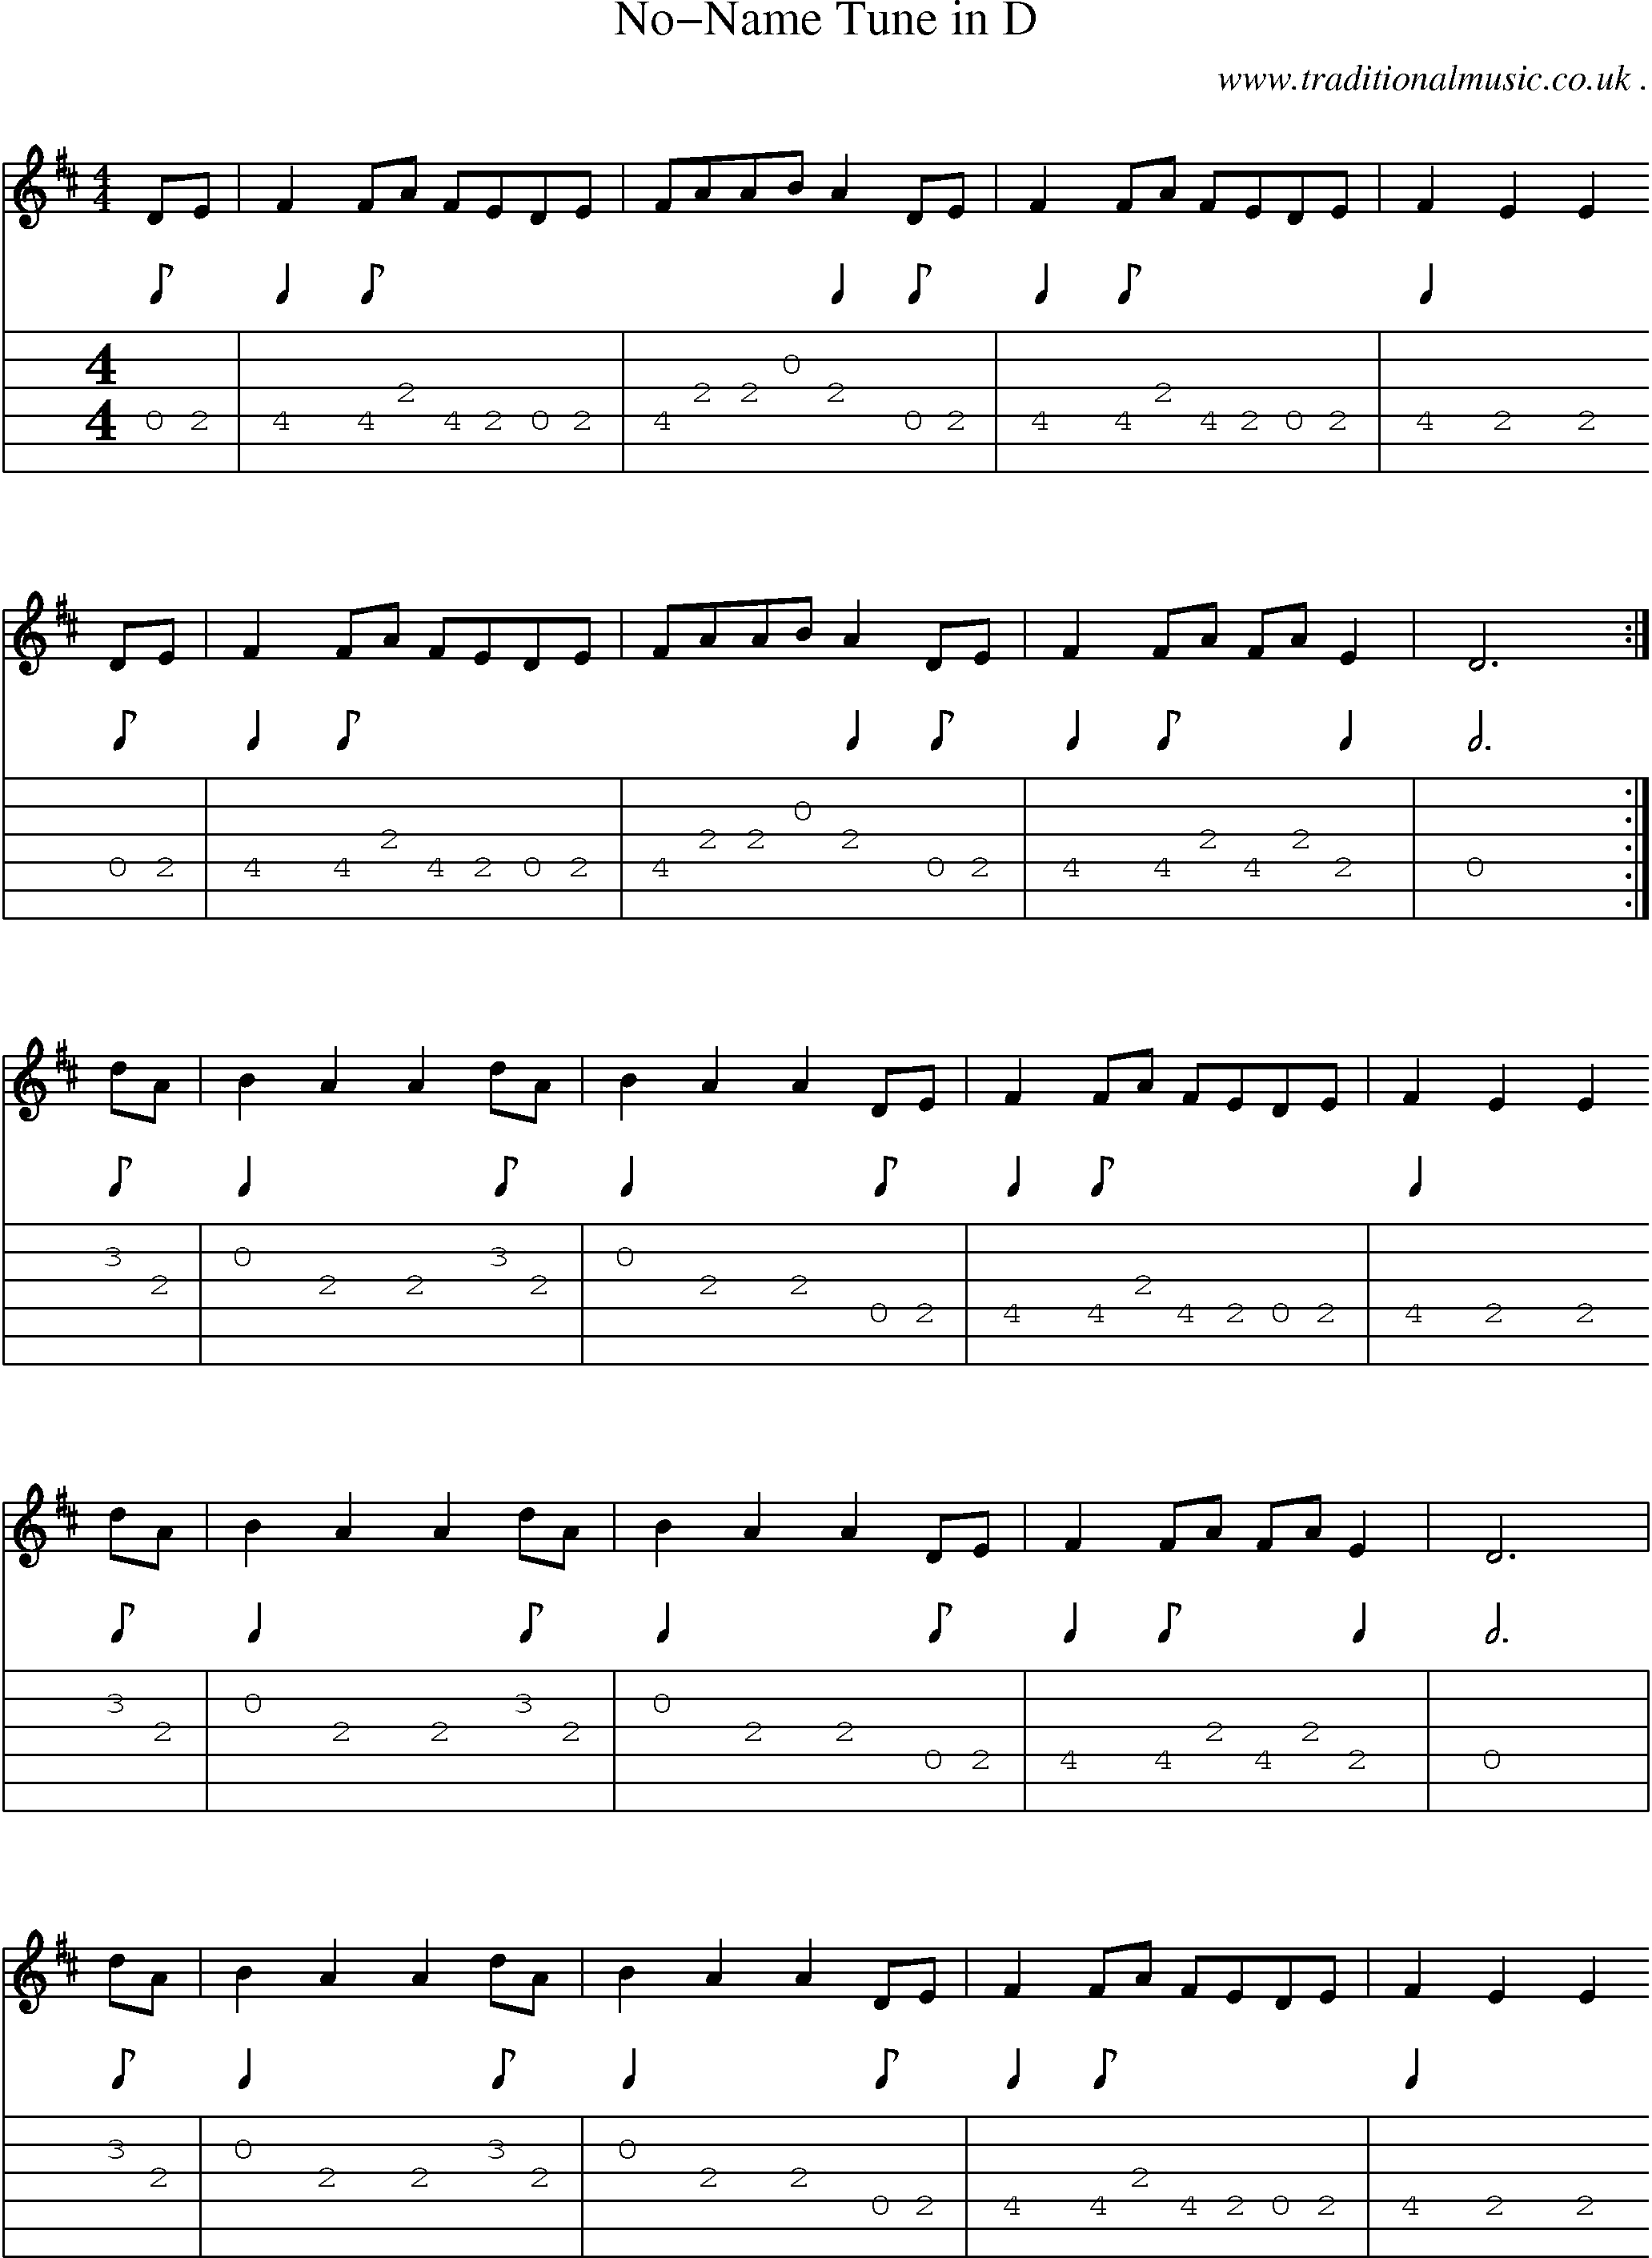 Sheet-music  score, Chords and Guitar Tabs for No-name Tune In D